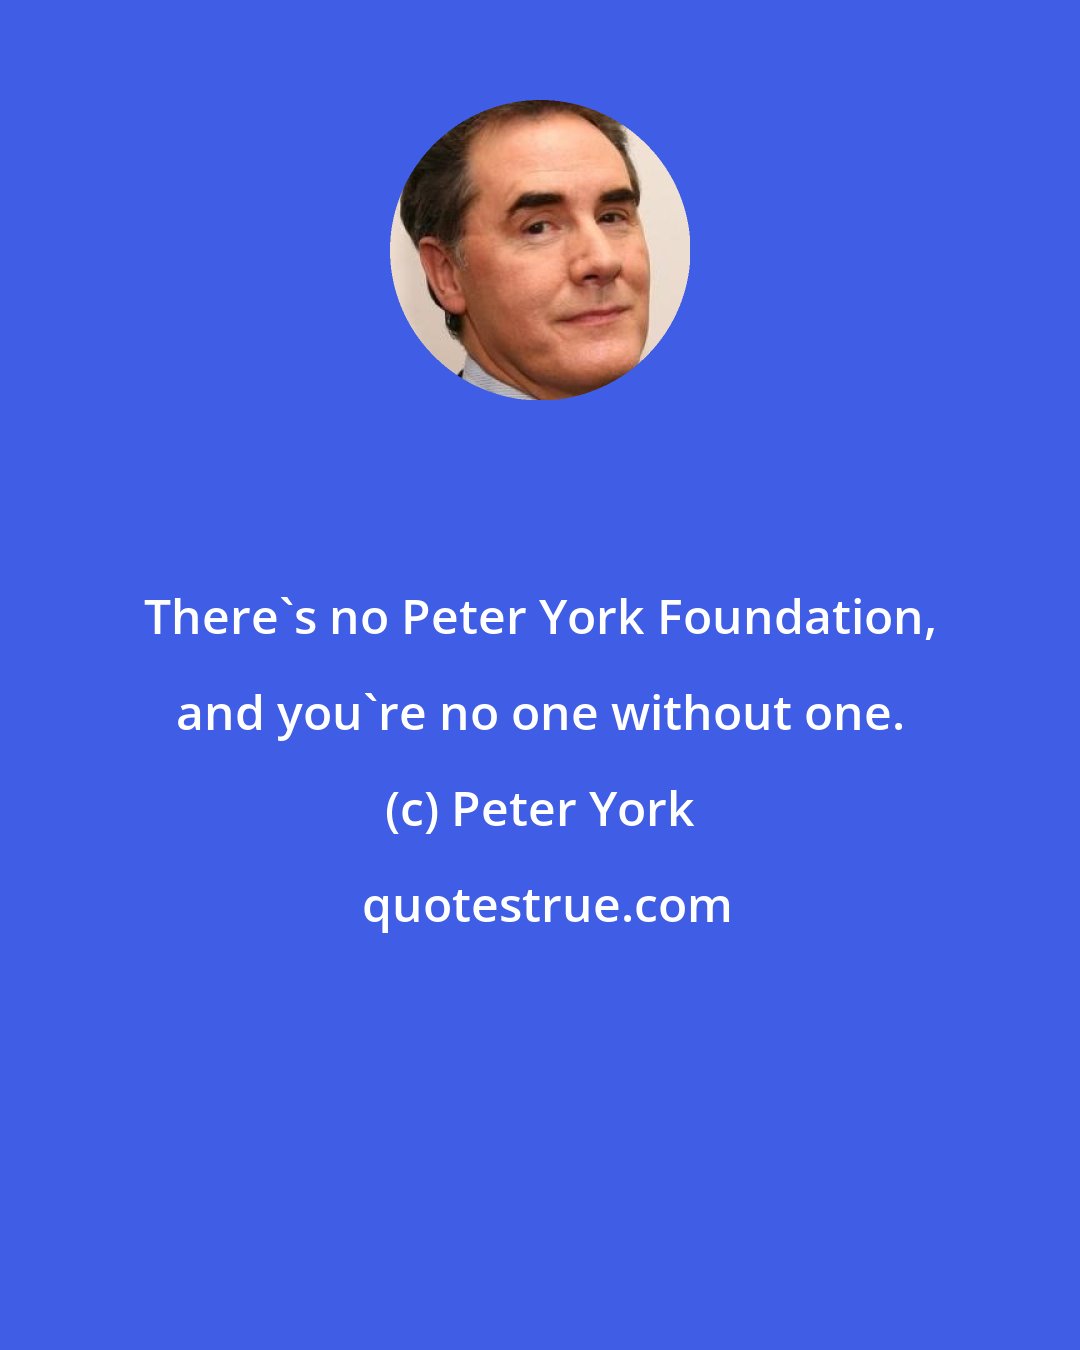 Peter York: There's no Peter York Foundation, and you're no one without one.